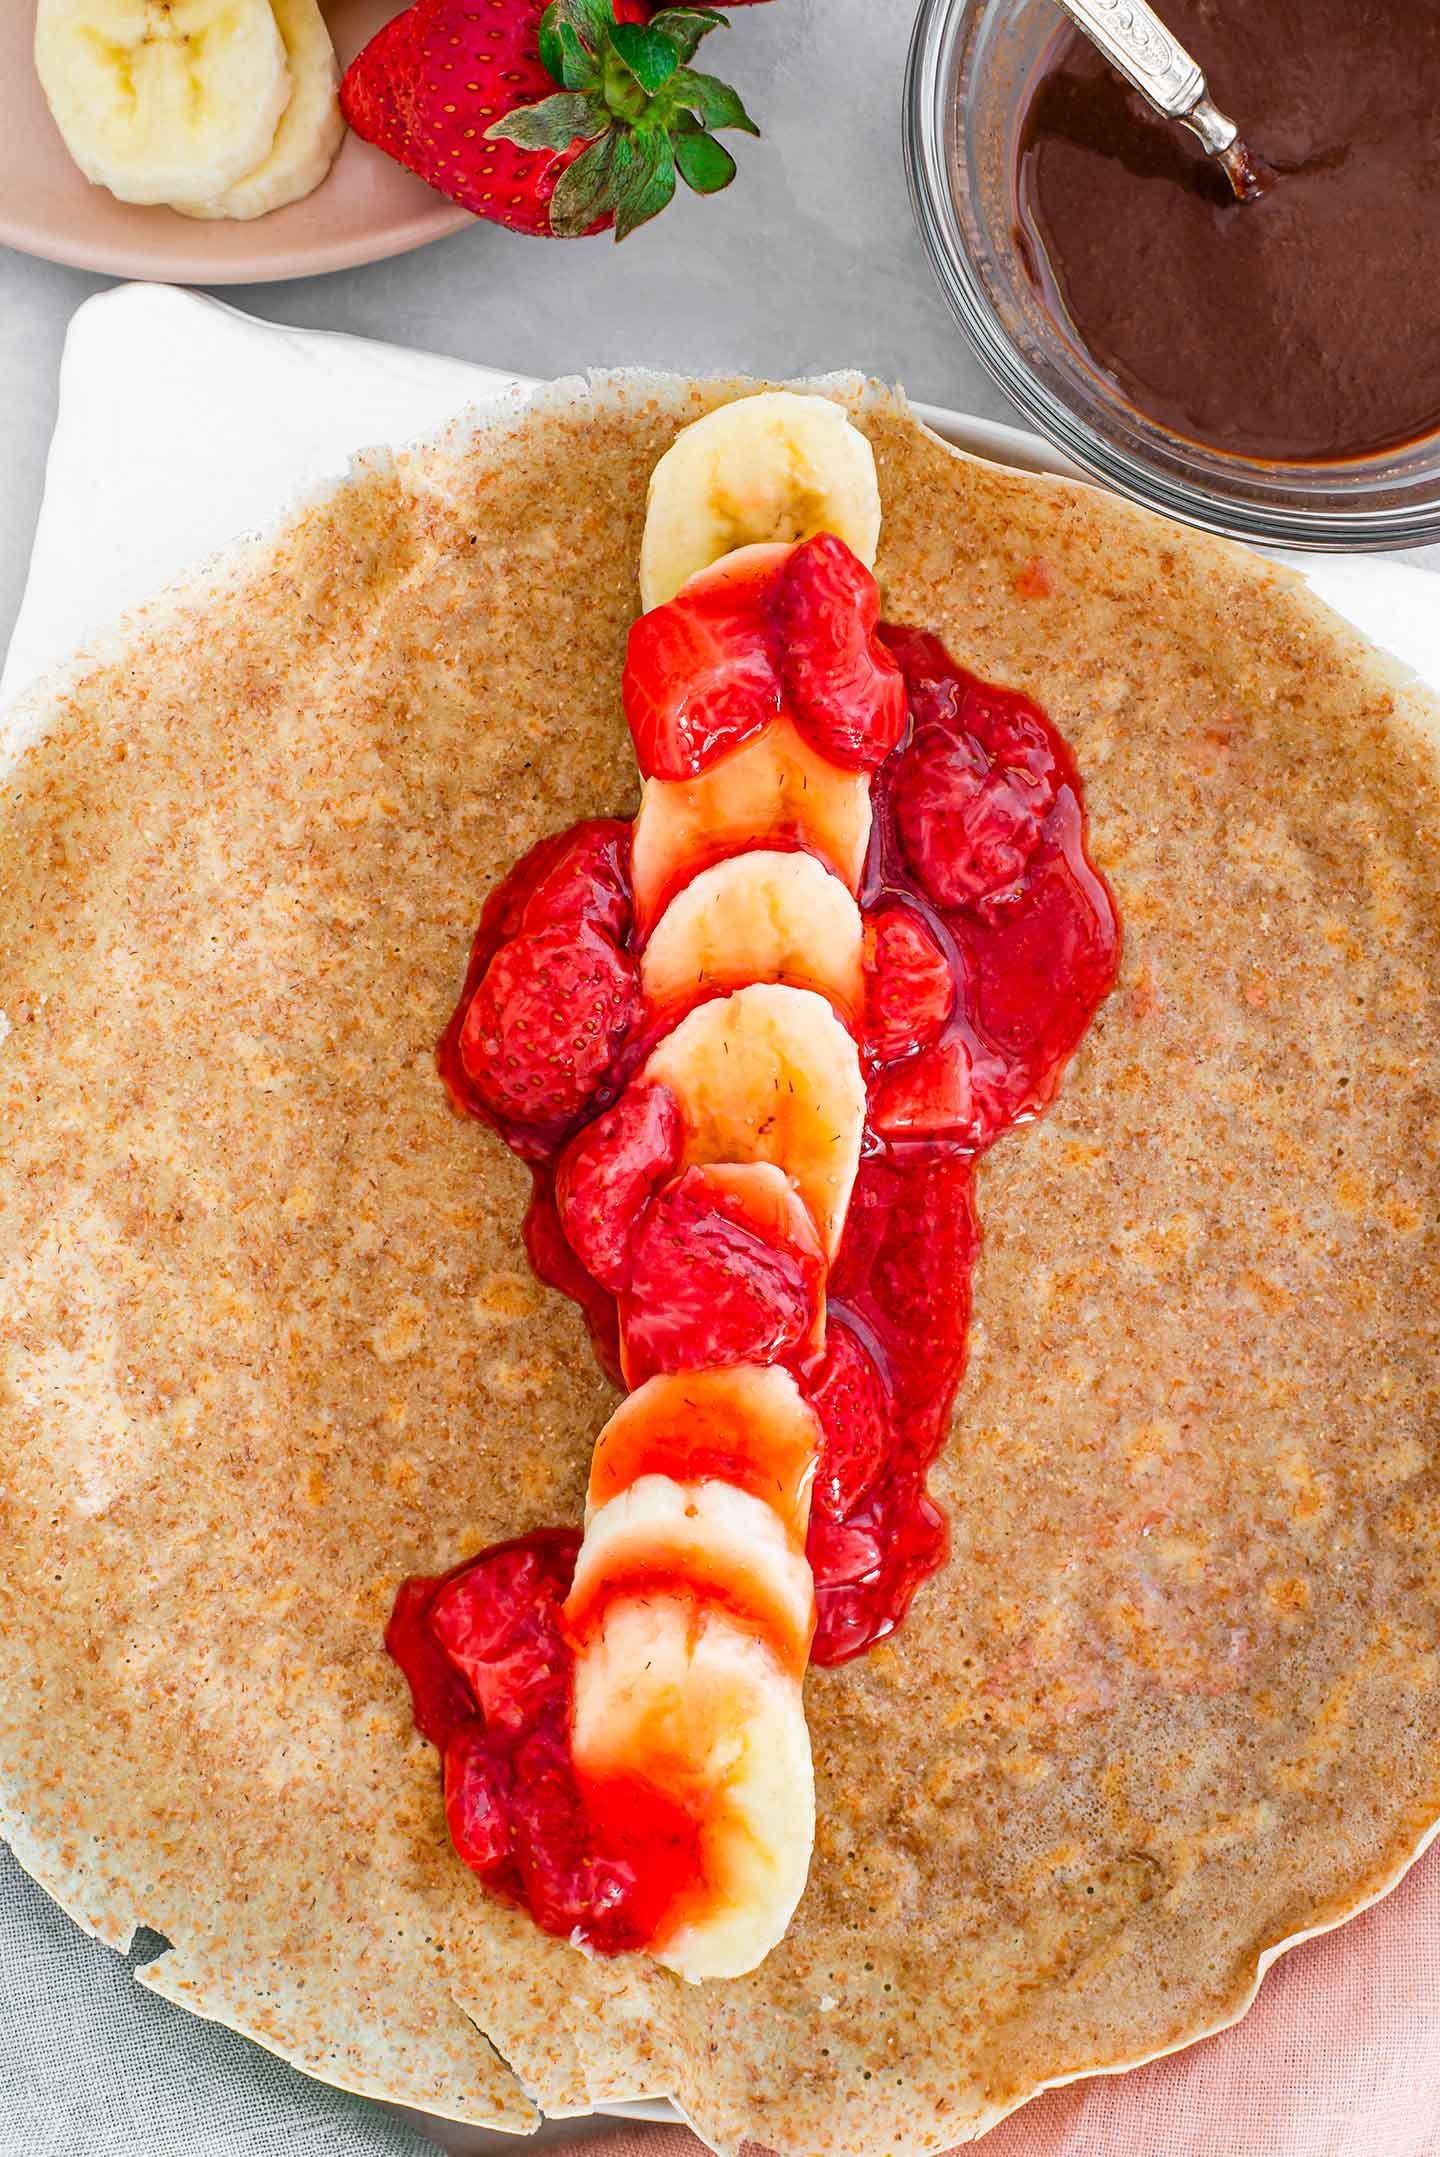 Top down view of sliced banana in a single layer in the middle of a crepe with strawberry sauce drizzled over before being rolled up.